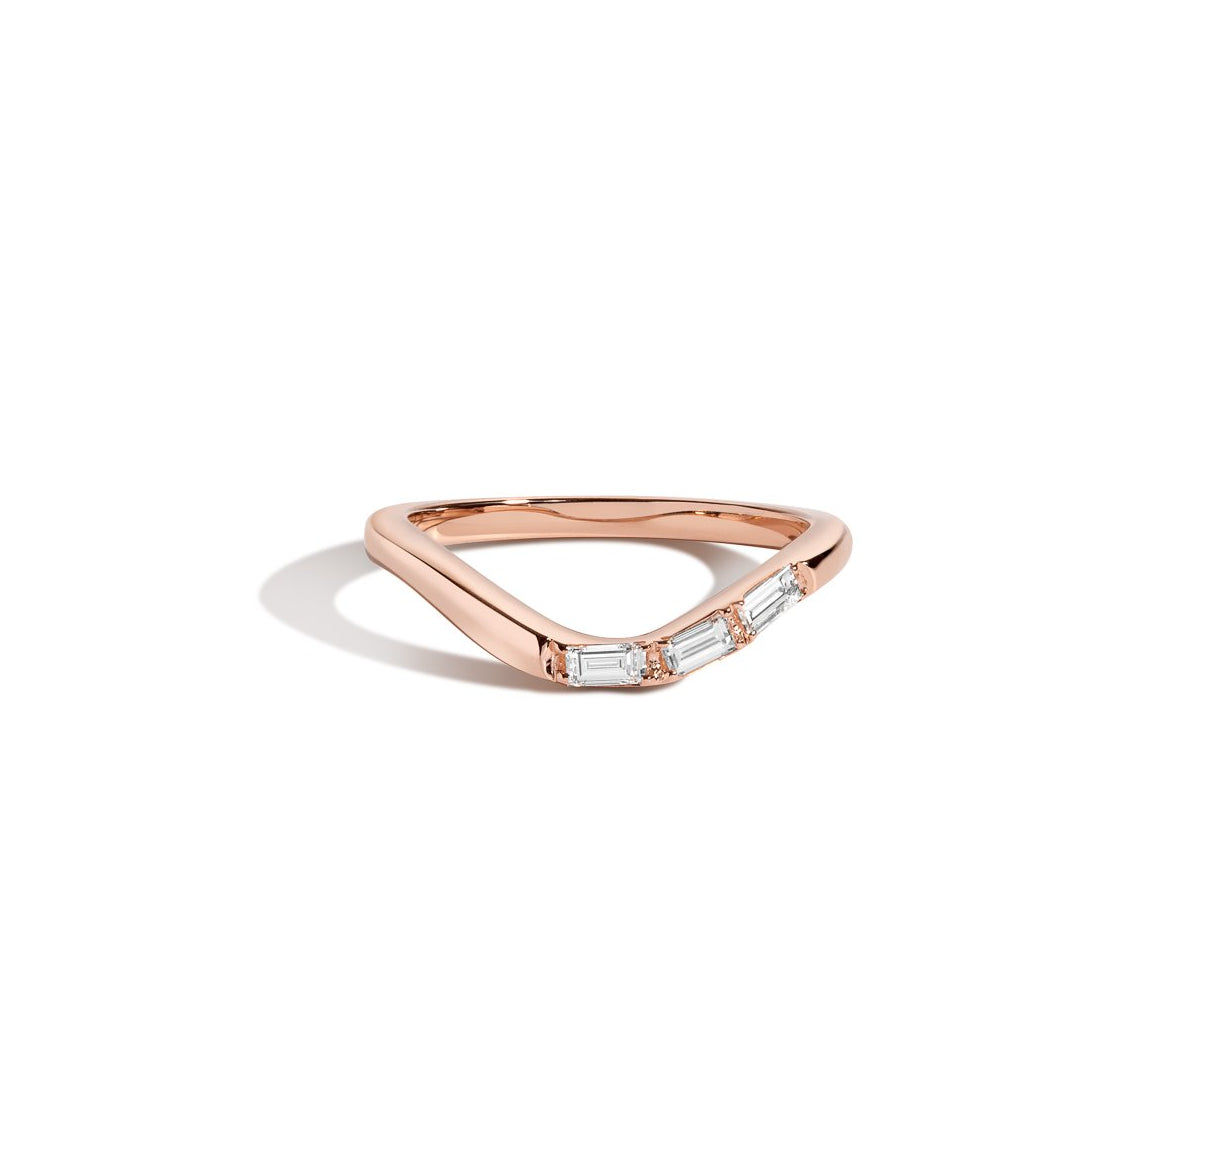 Shahla Karimi Jewelry Curved Asymmetrical Baguette Band in 14K Rose Gold and White Diamonds